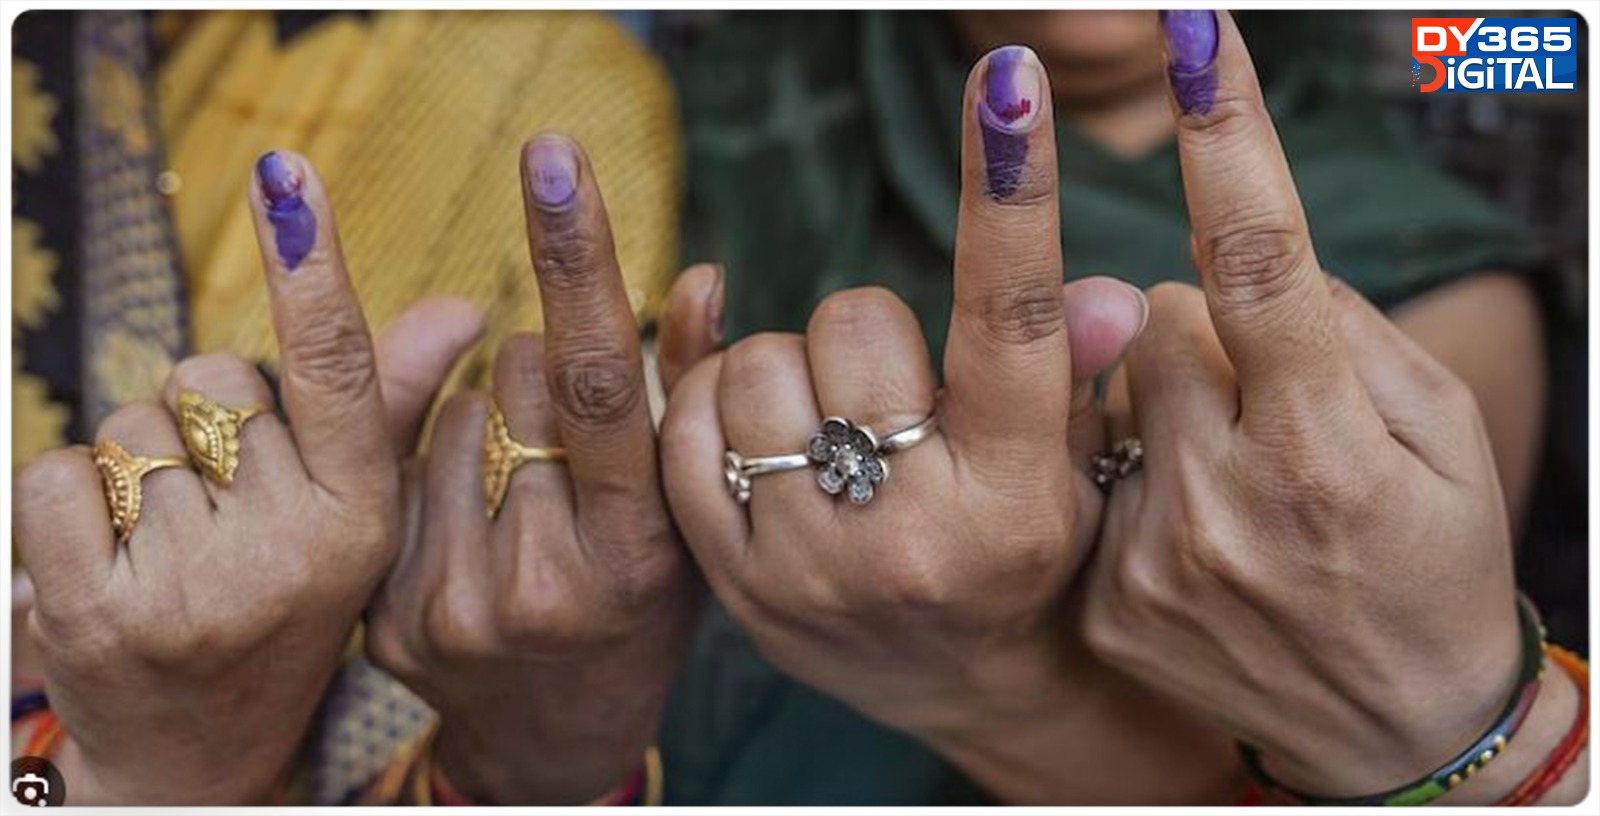 lok-sabha-elections-assam-records-highest-voter-turnout-at-8171-pc-in-phase-3